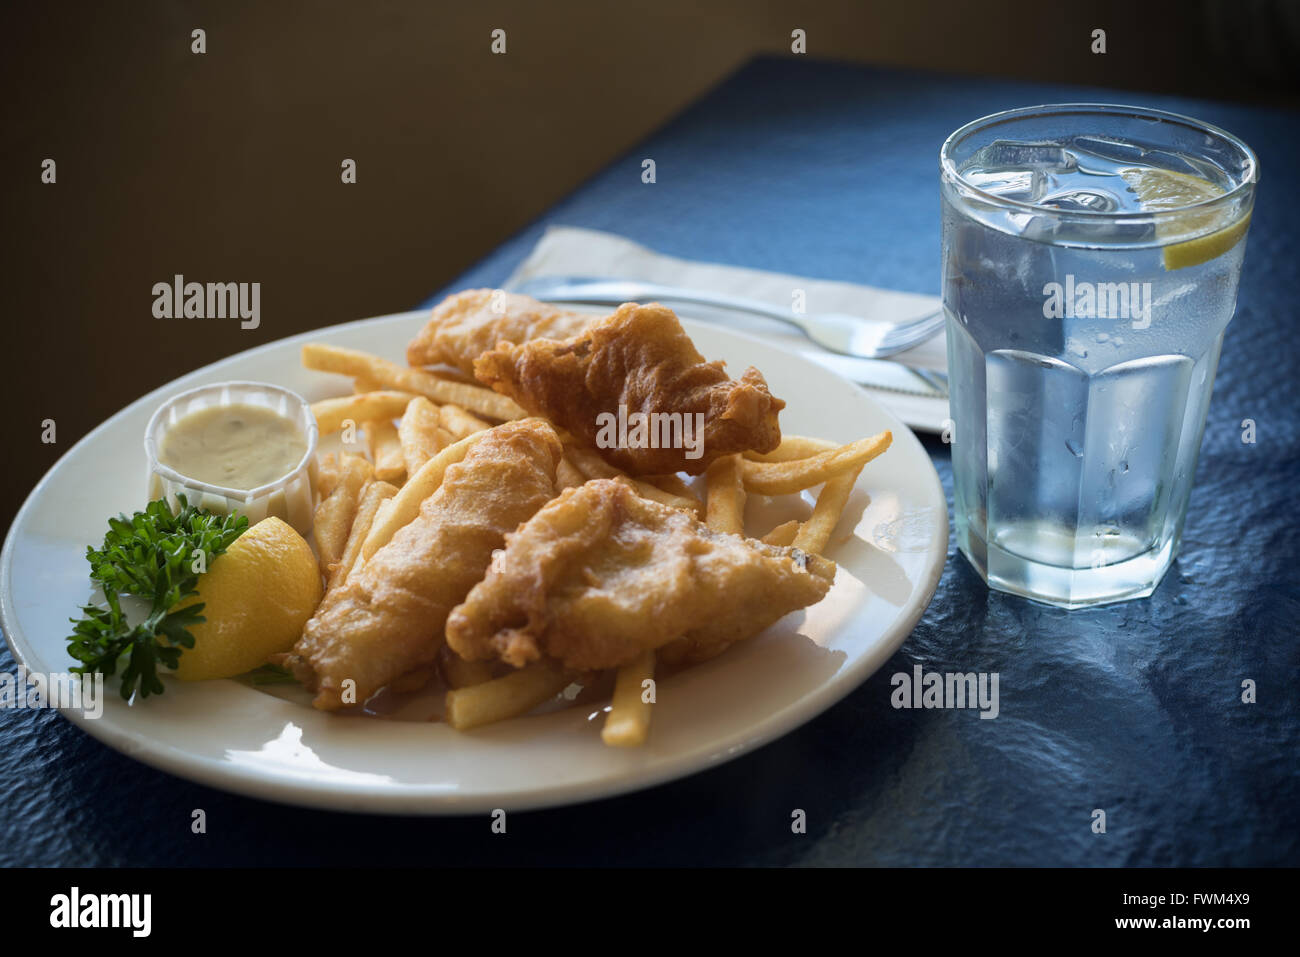 A plate of fried fish, cod or hallibut, with french fries or chips with a glass ow water Stock Photo